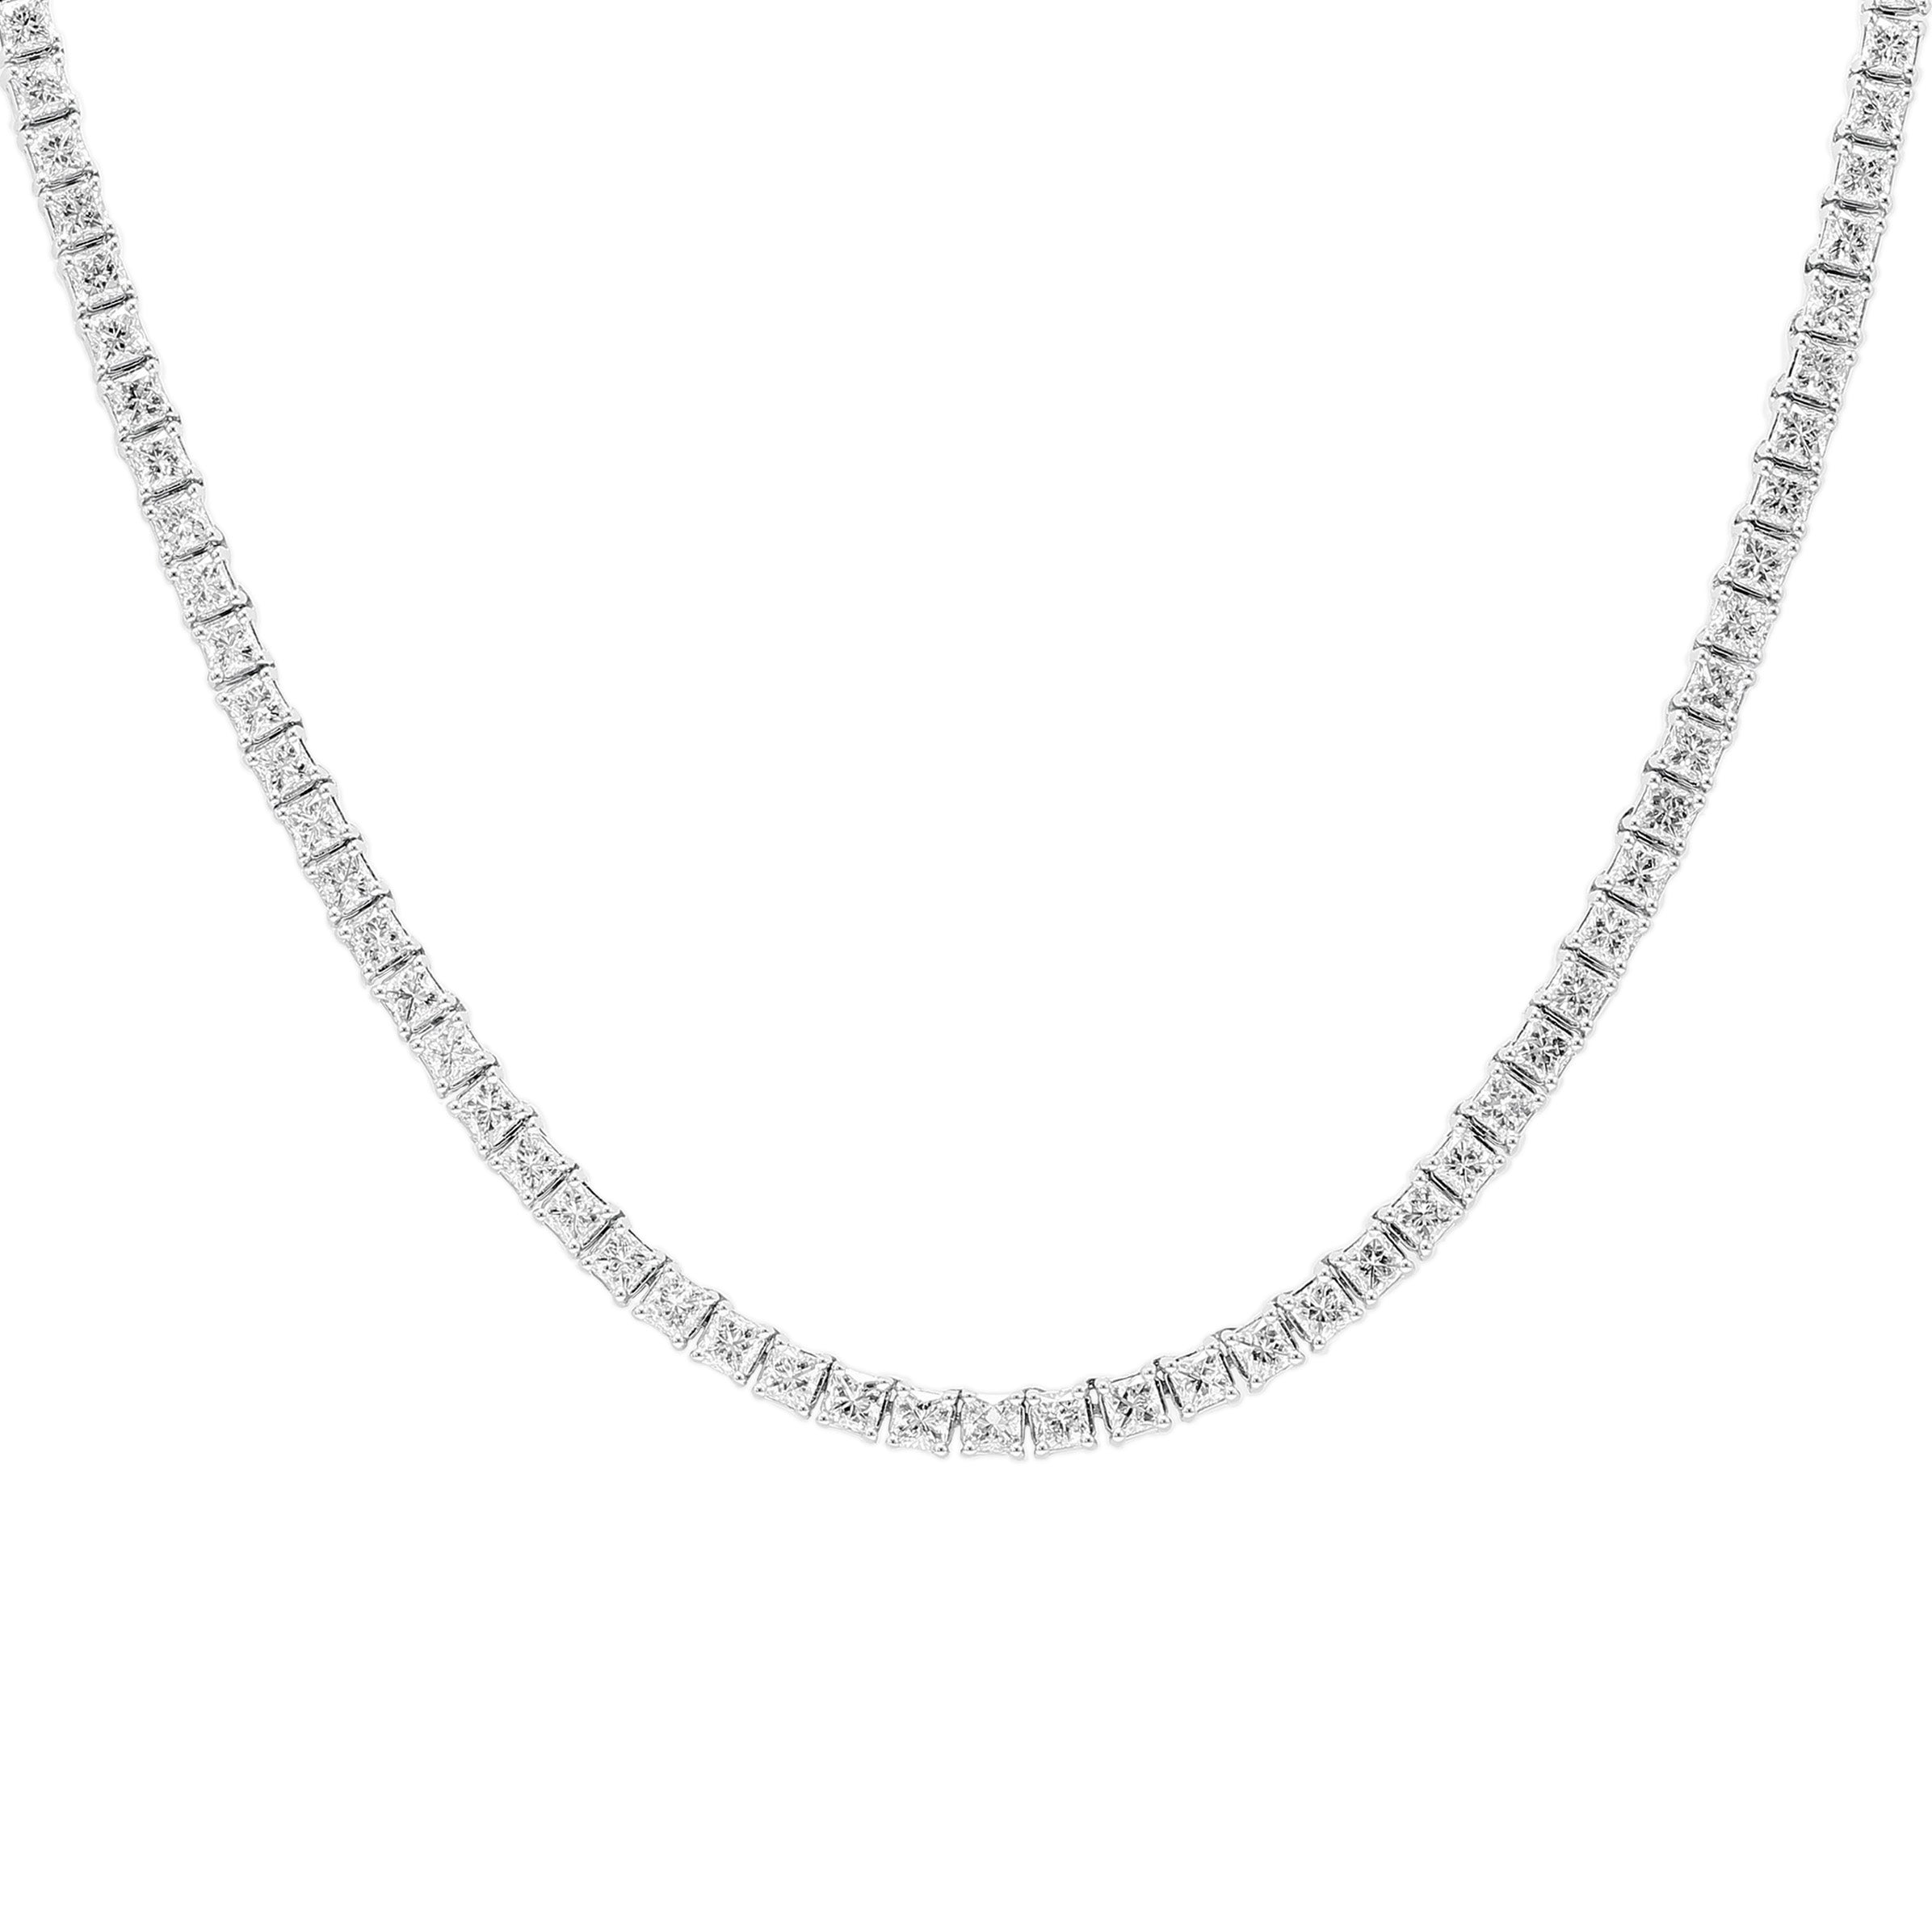 Shimansky - My Girl Diamond Tennis Necklace 25.60ct Crafted in 18K White Gold